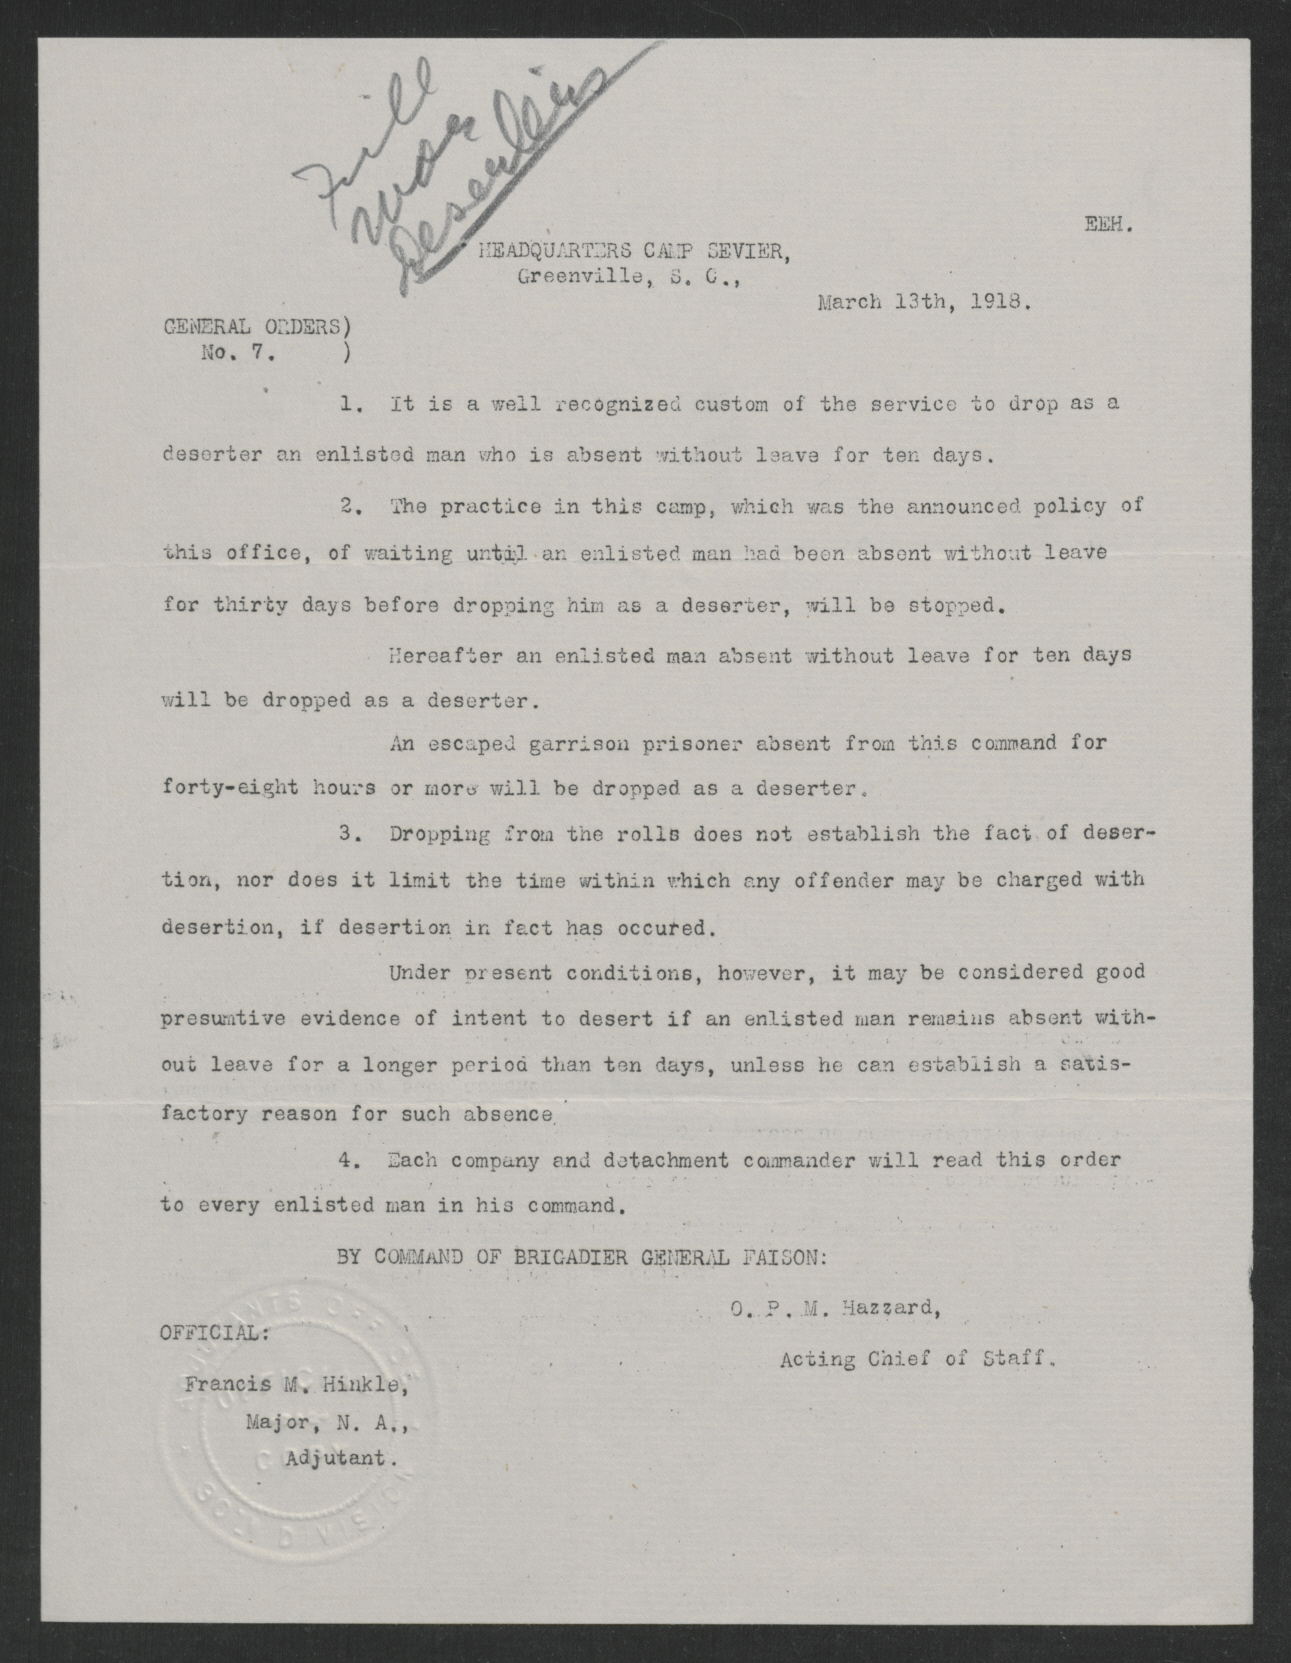 General Orders No. 7, March 13, 1918